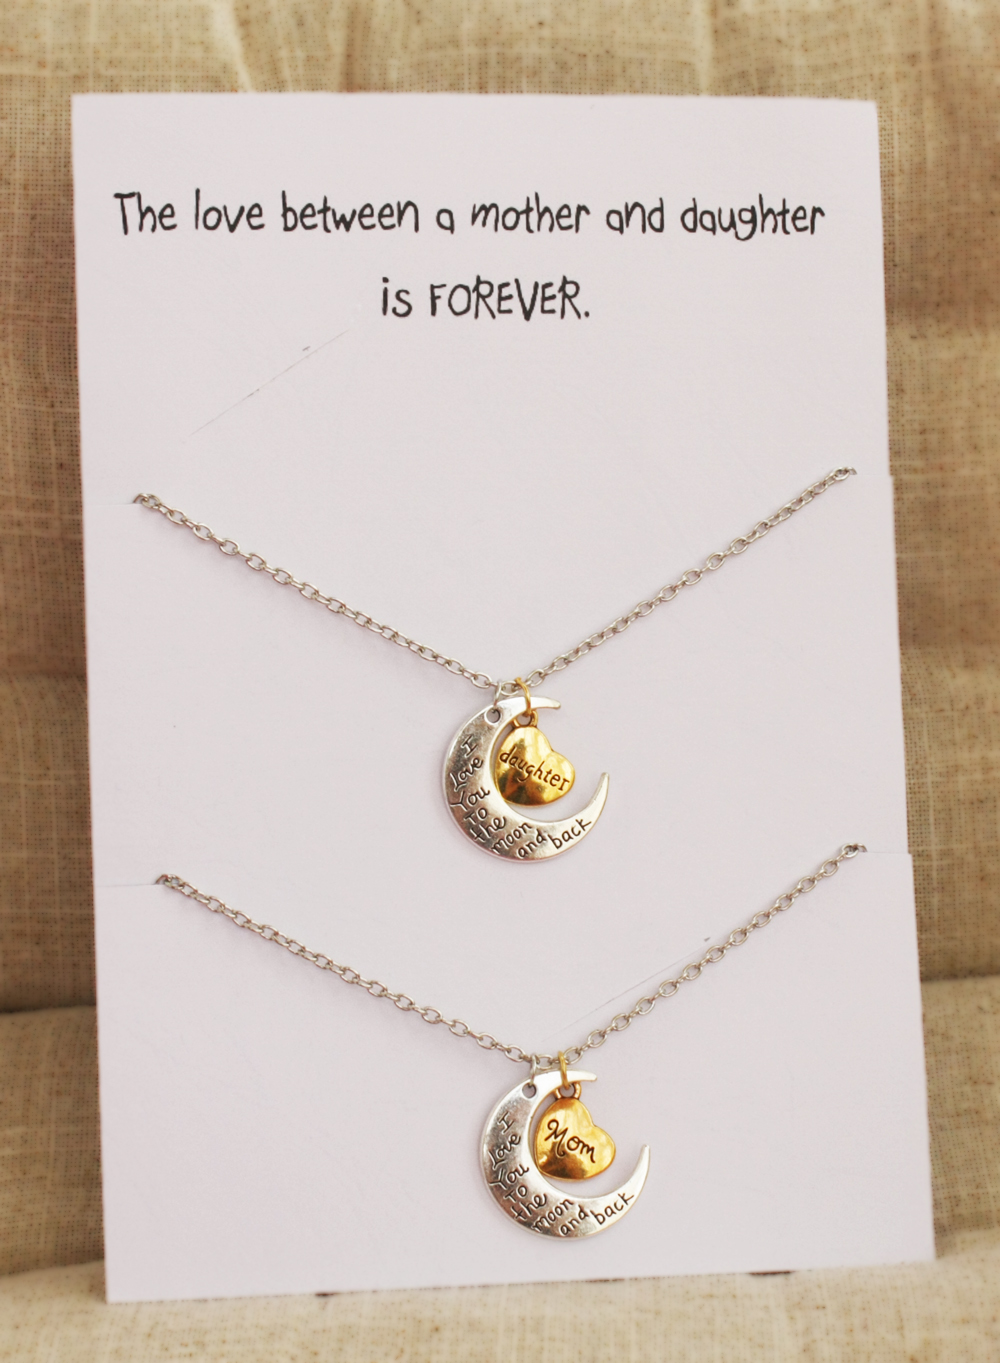 Love Between Mother And Daughter Is Forever Love You Mom Love You Daughter Two Necklaces Gift Wrapped Fashion Gift Card Necklaces